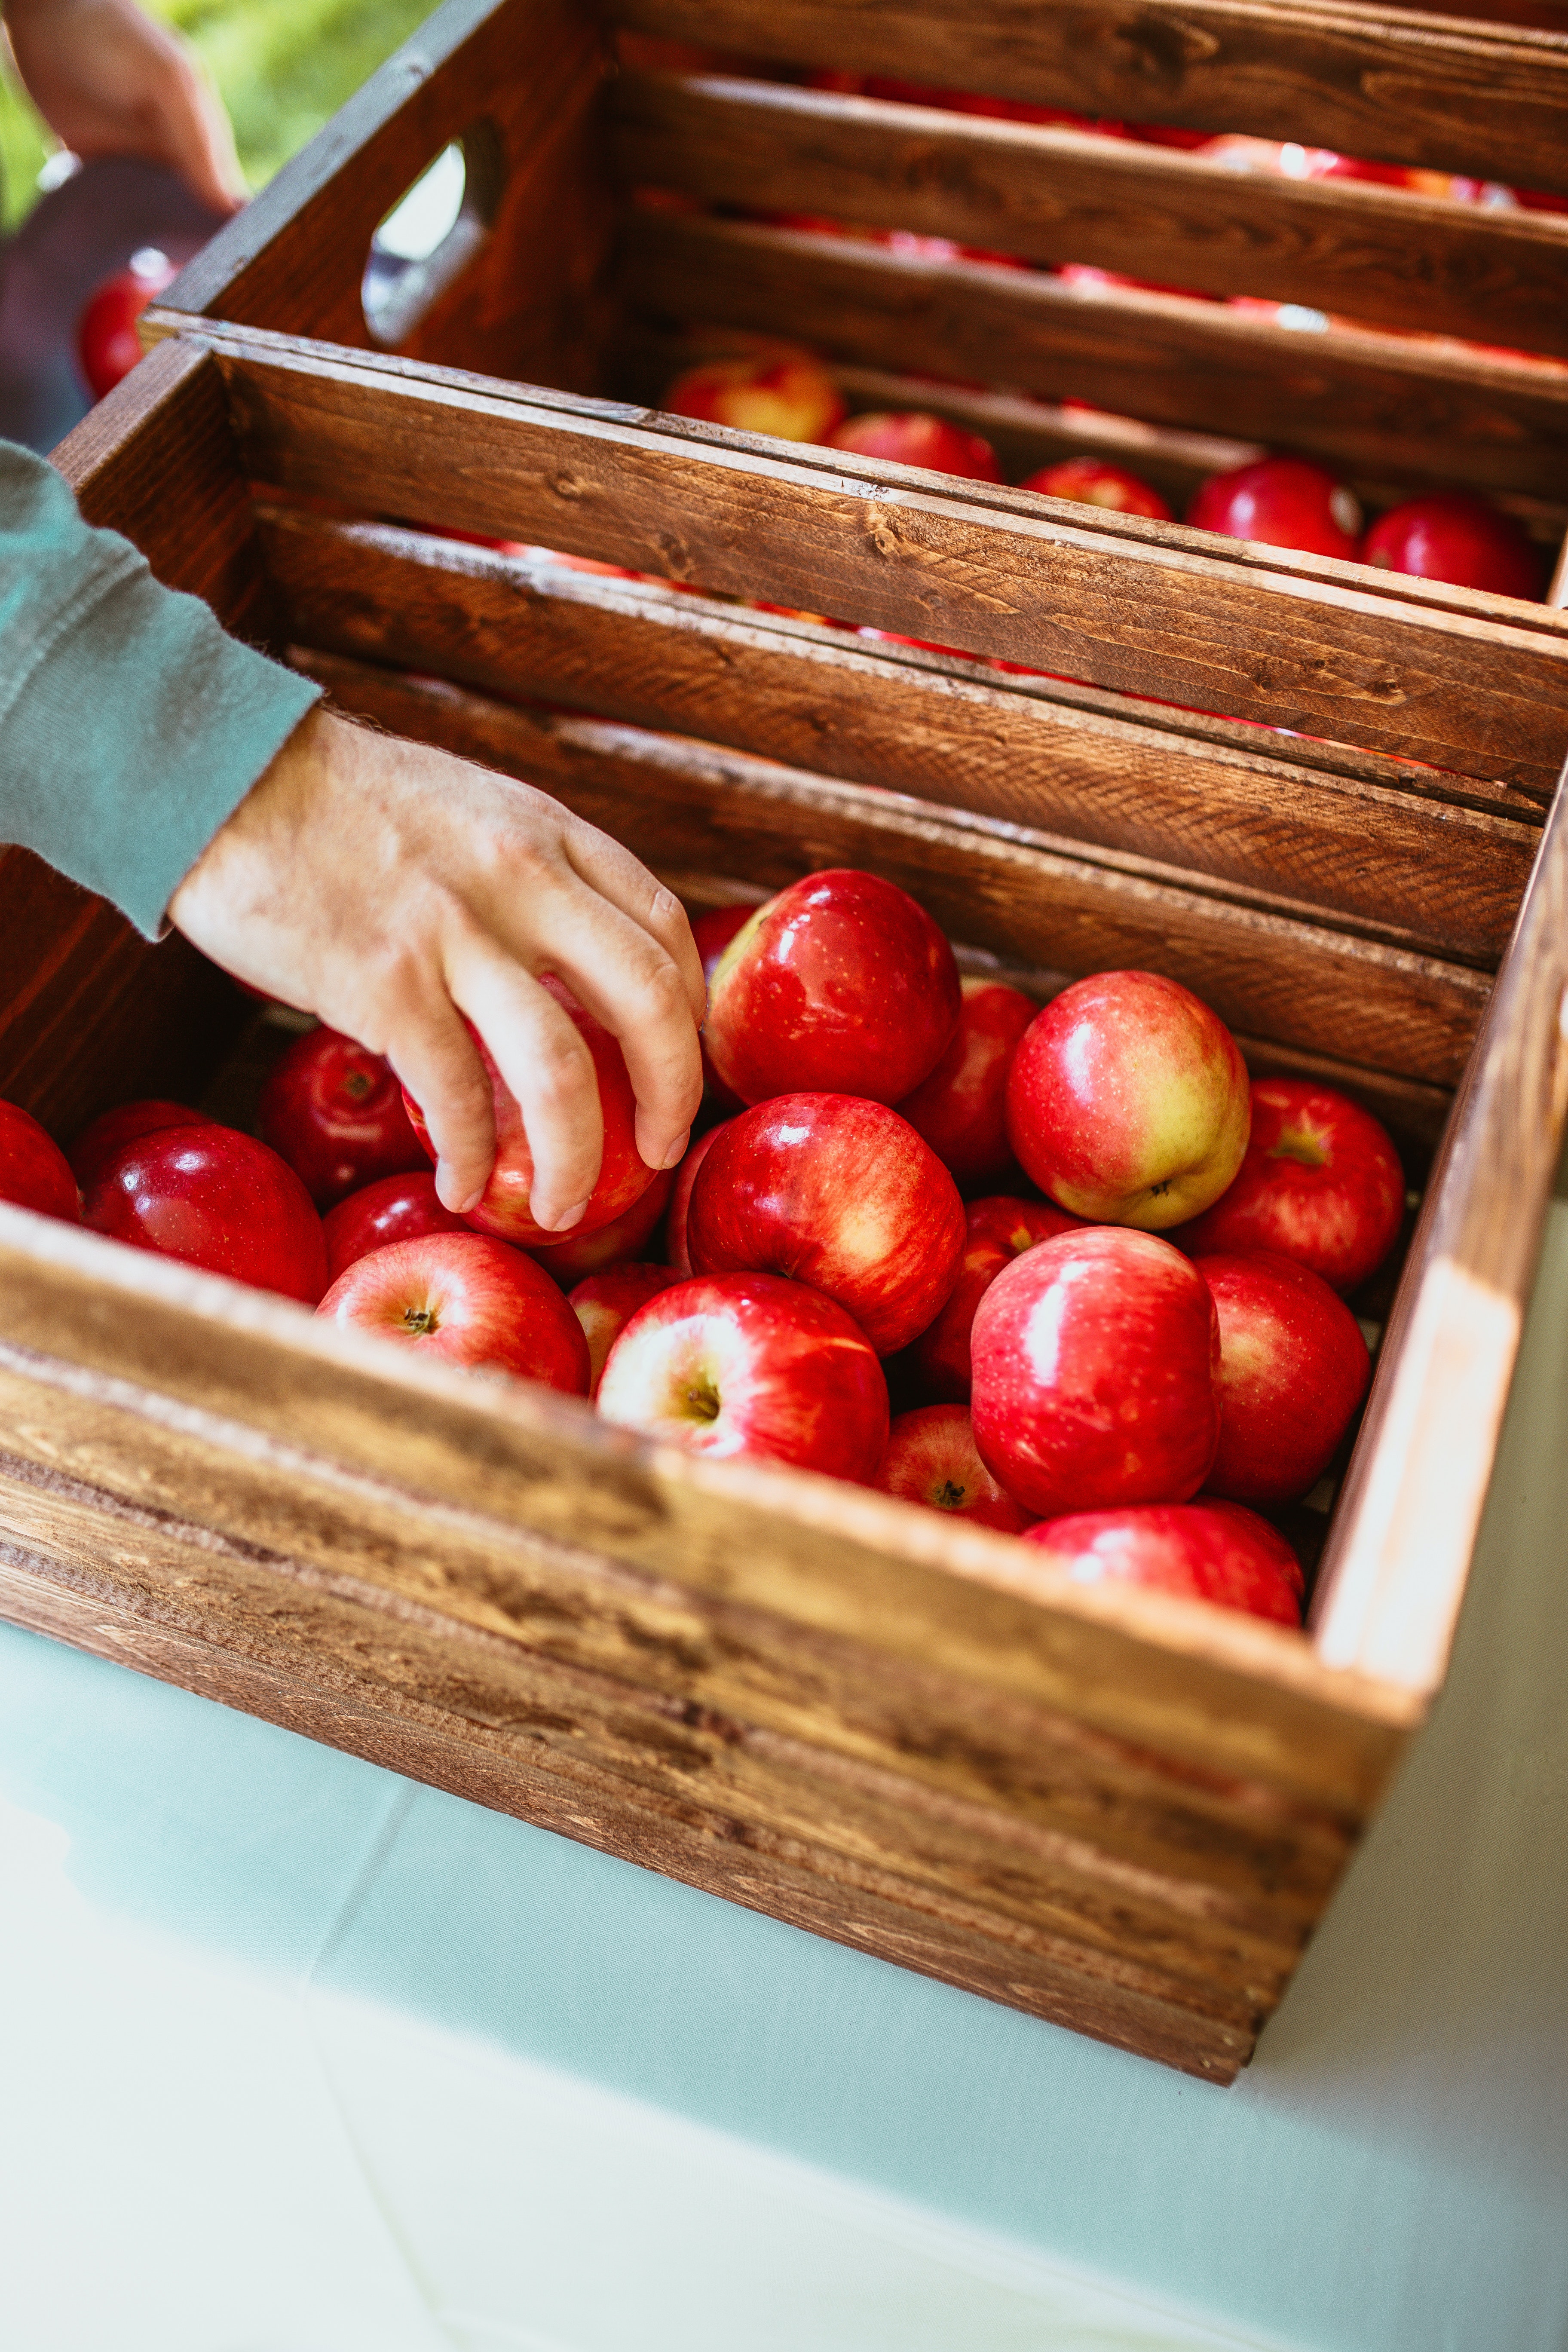 Man reaching for an apple in a basket.